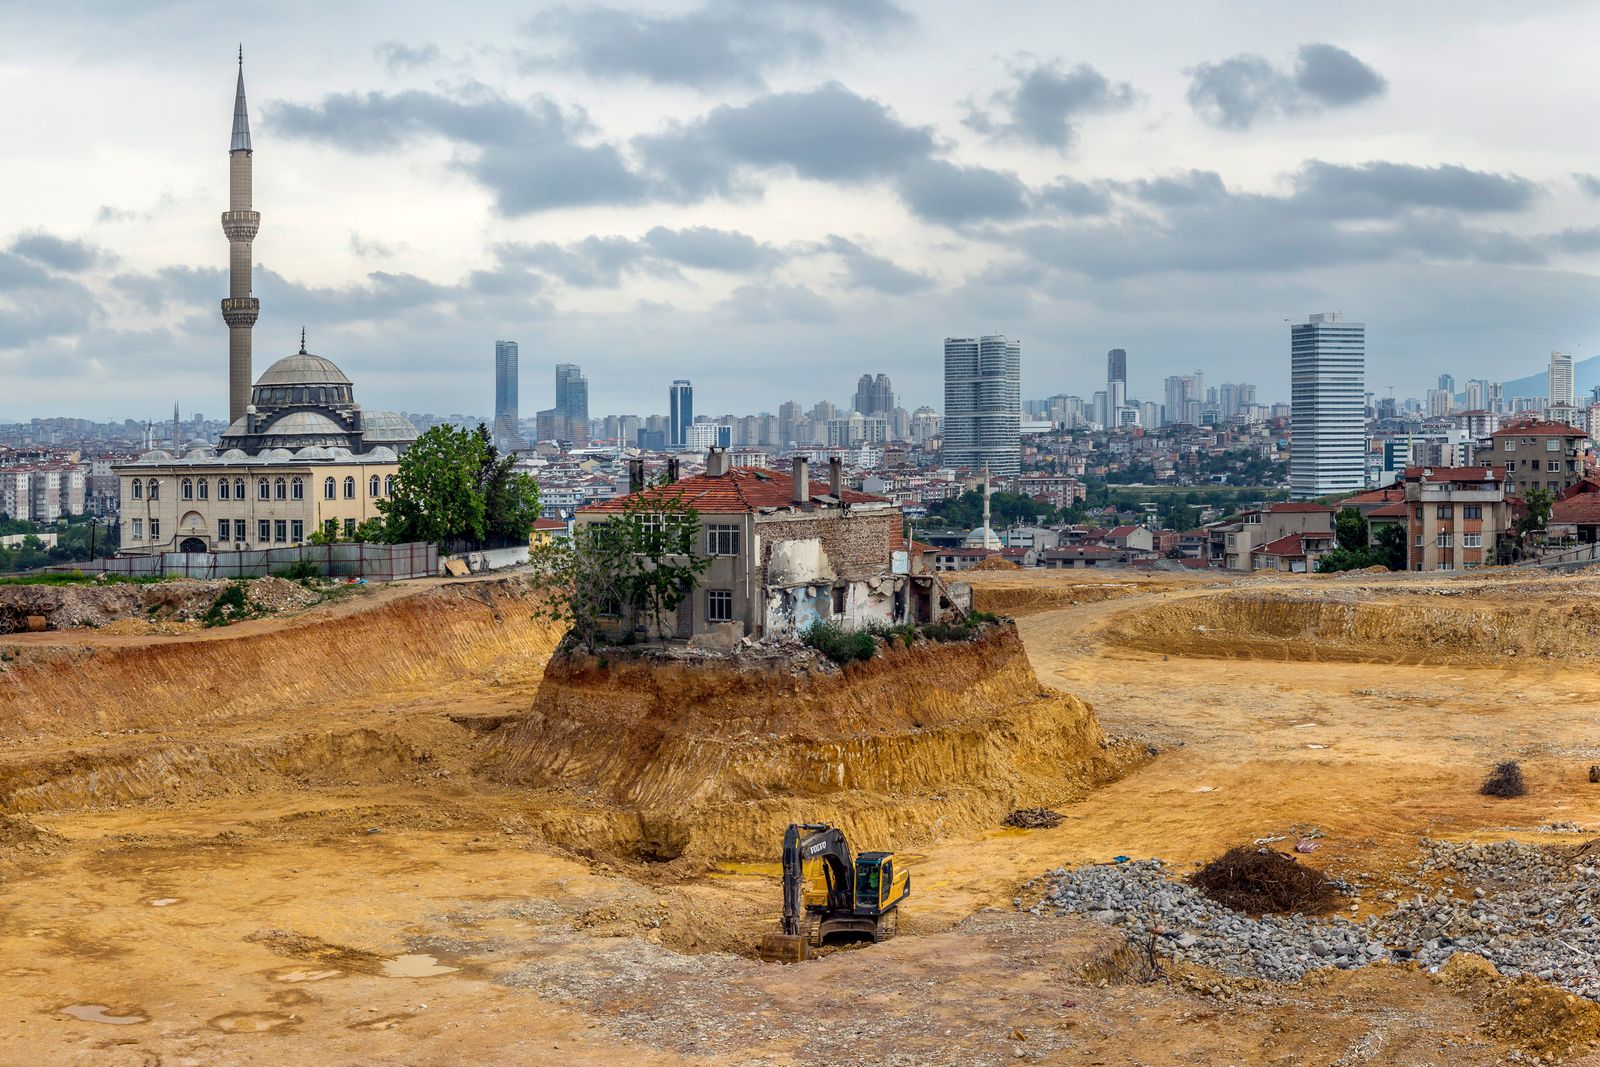 © Murat Germen - Image from the Urban transformation and gentrification in Istanbul: Dispossession case in Fikirtepe neighborhood photography project